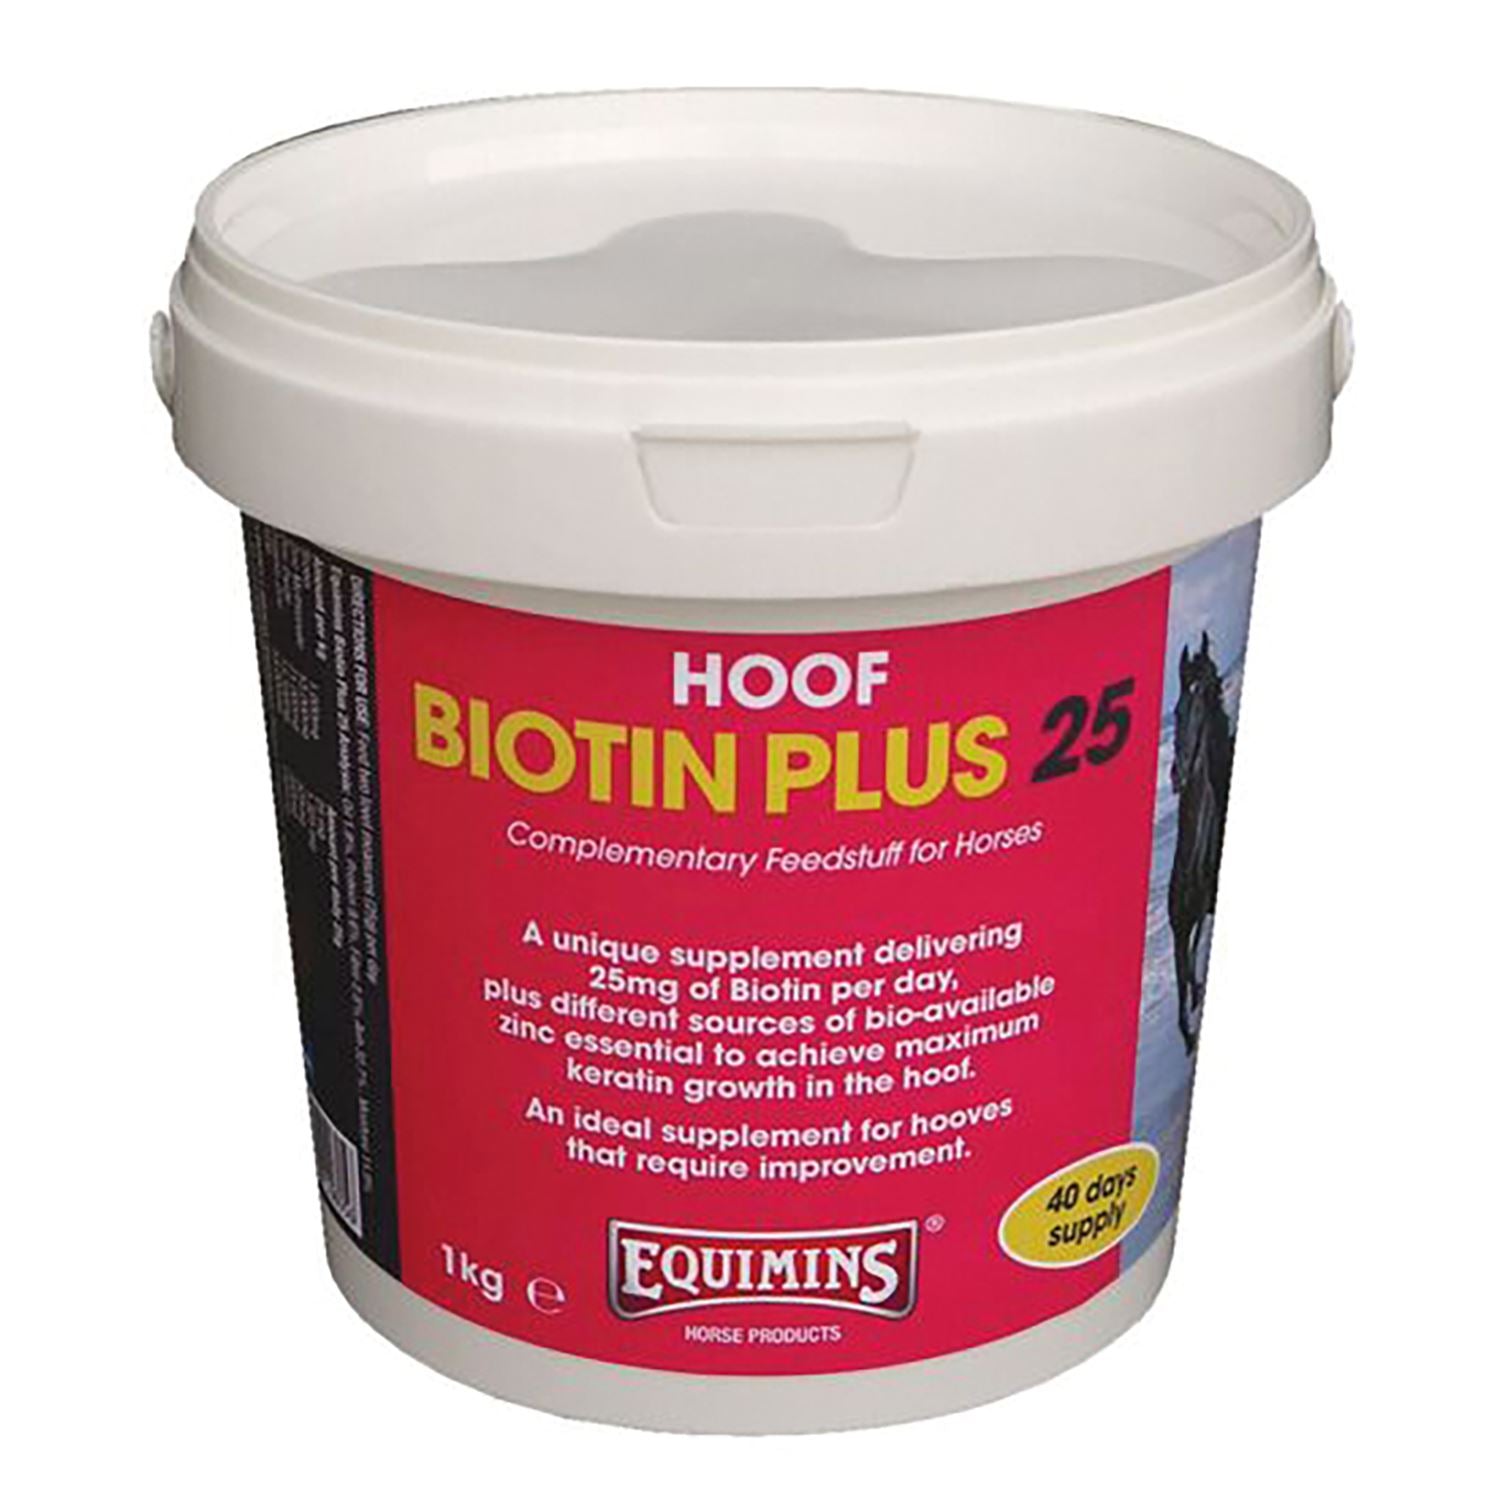 EQUIMINS BIOTIN PLUS 25 offers enhanced levels of biotin for your horse's hoof health.